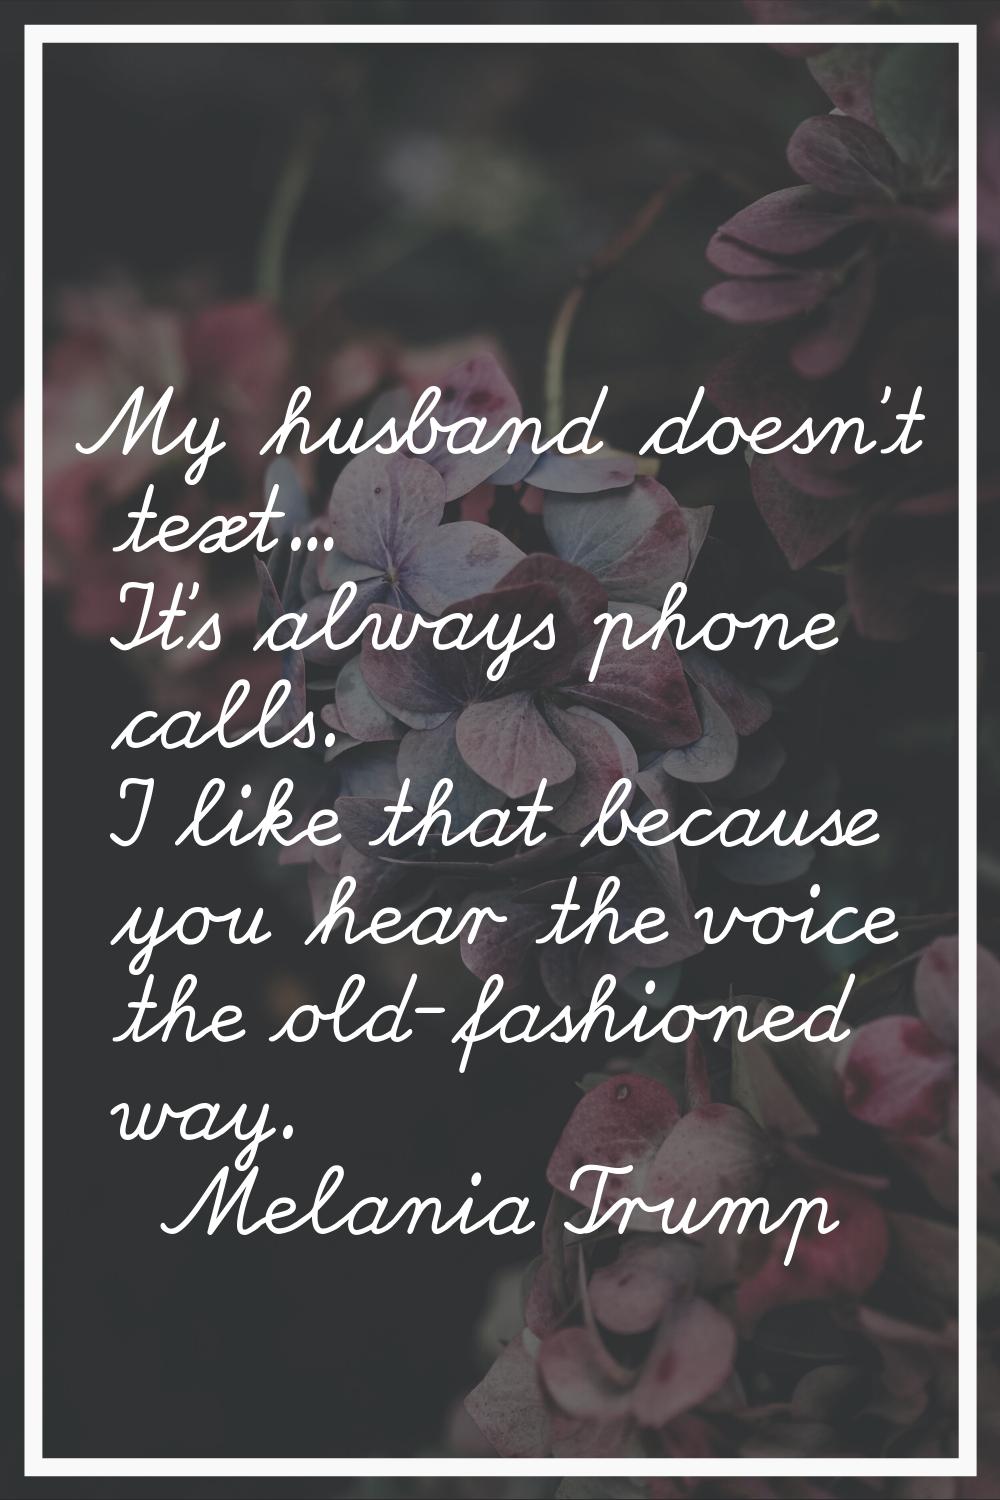 My husband doesn't text... It's always phone calls. I like that because you hear the voice the old-